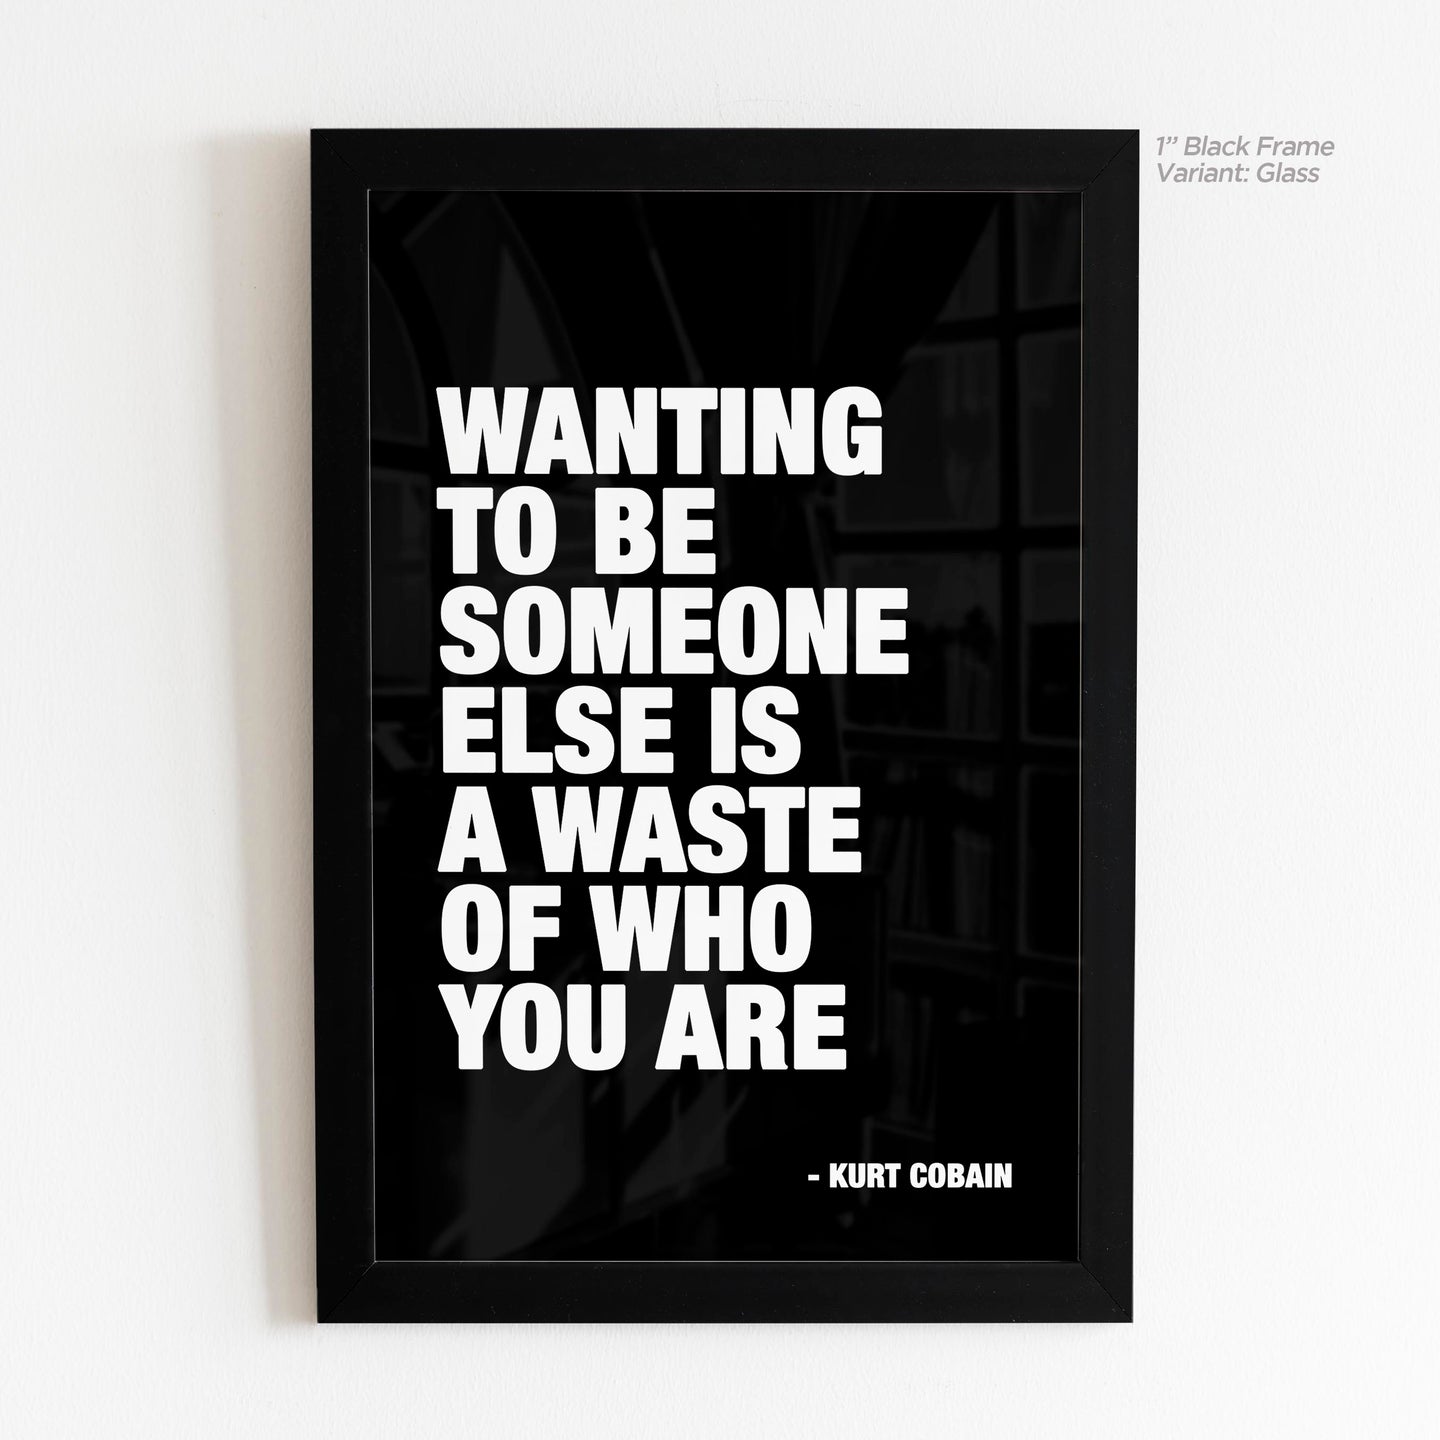 Wanting To Be Someone Else - Kurt Cobain Quote Art